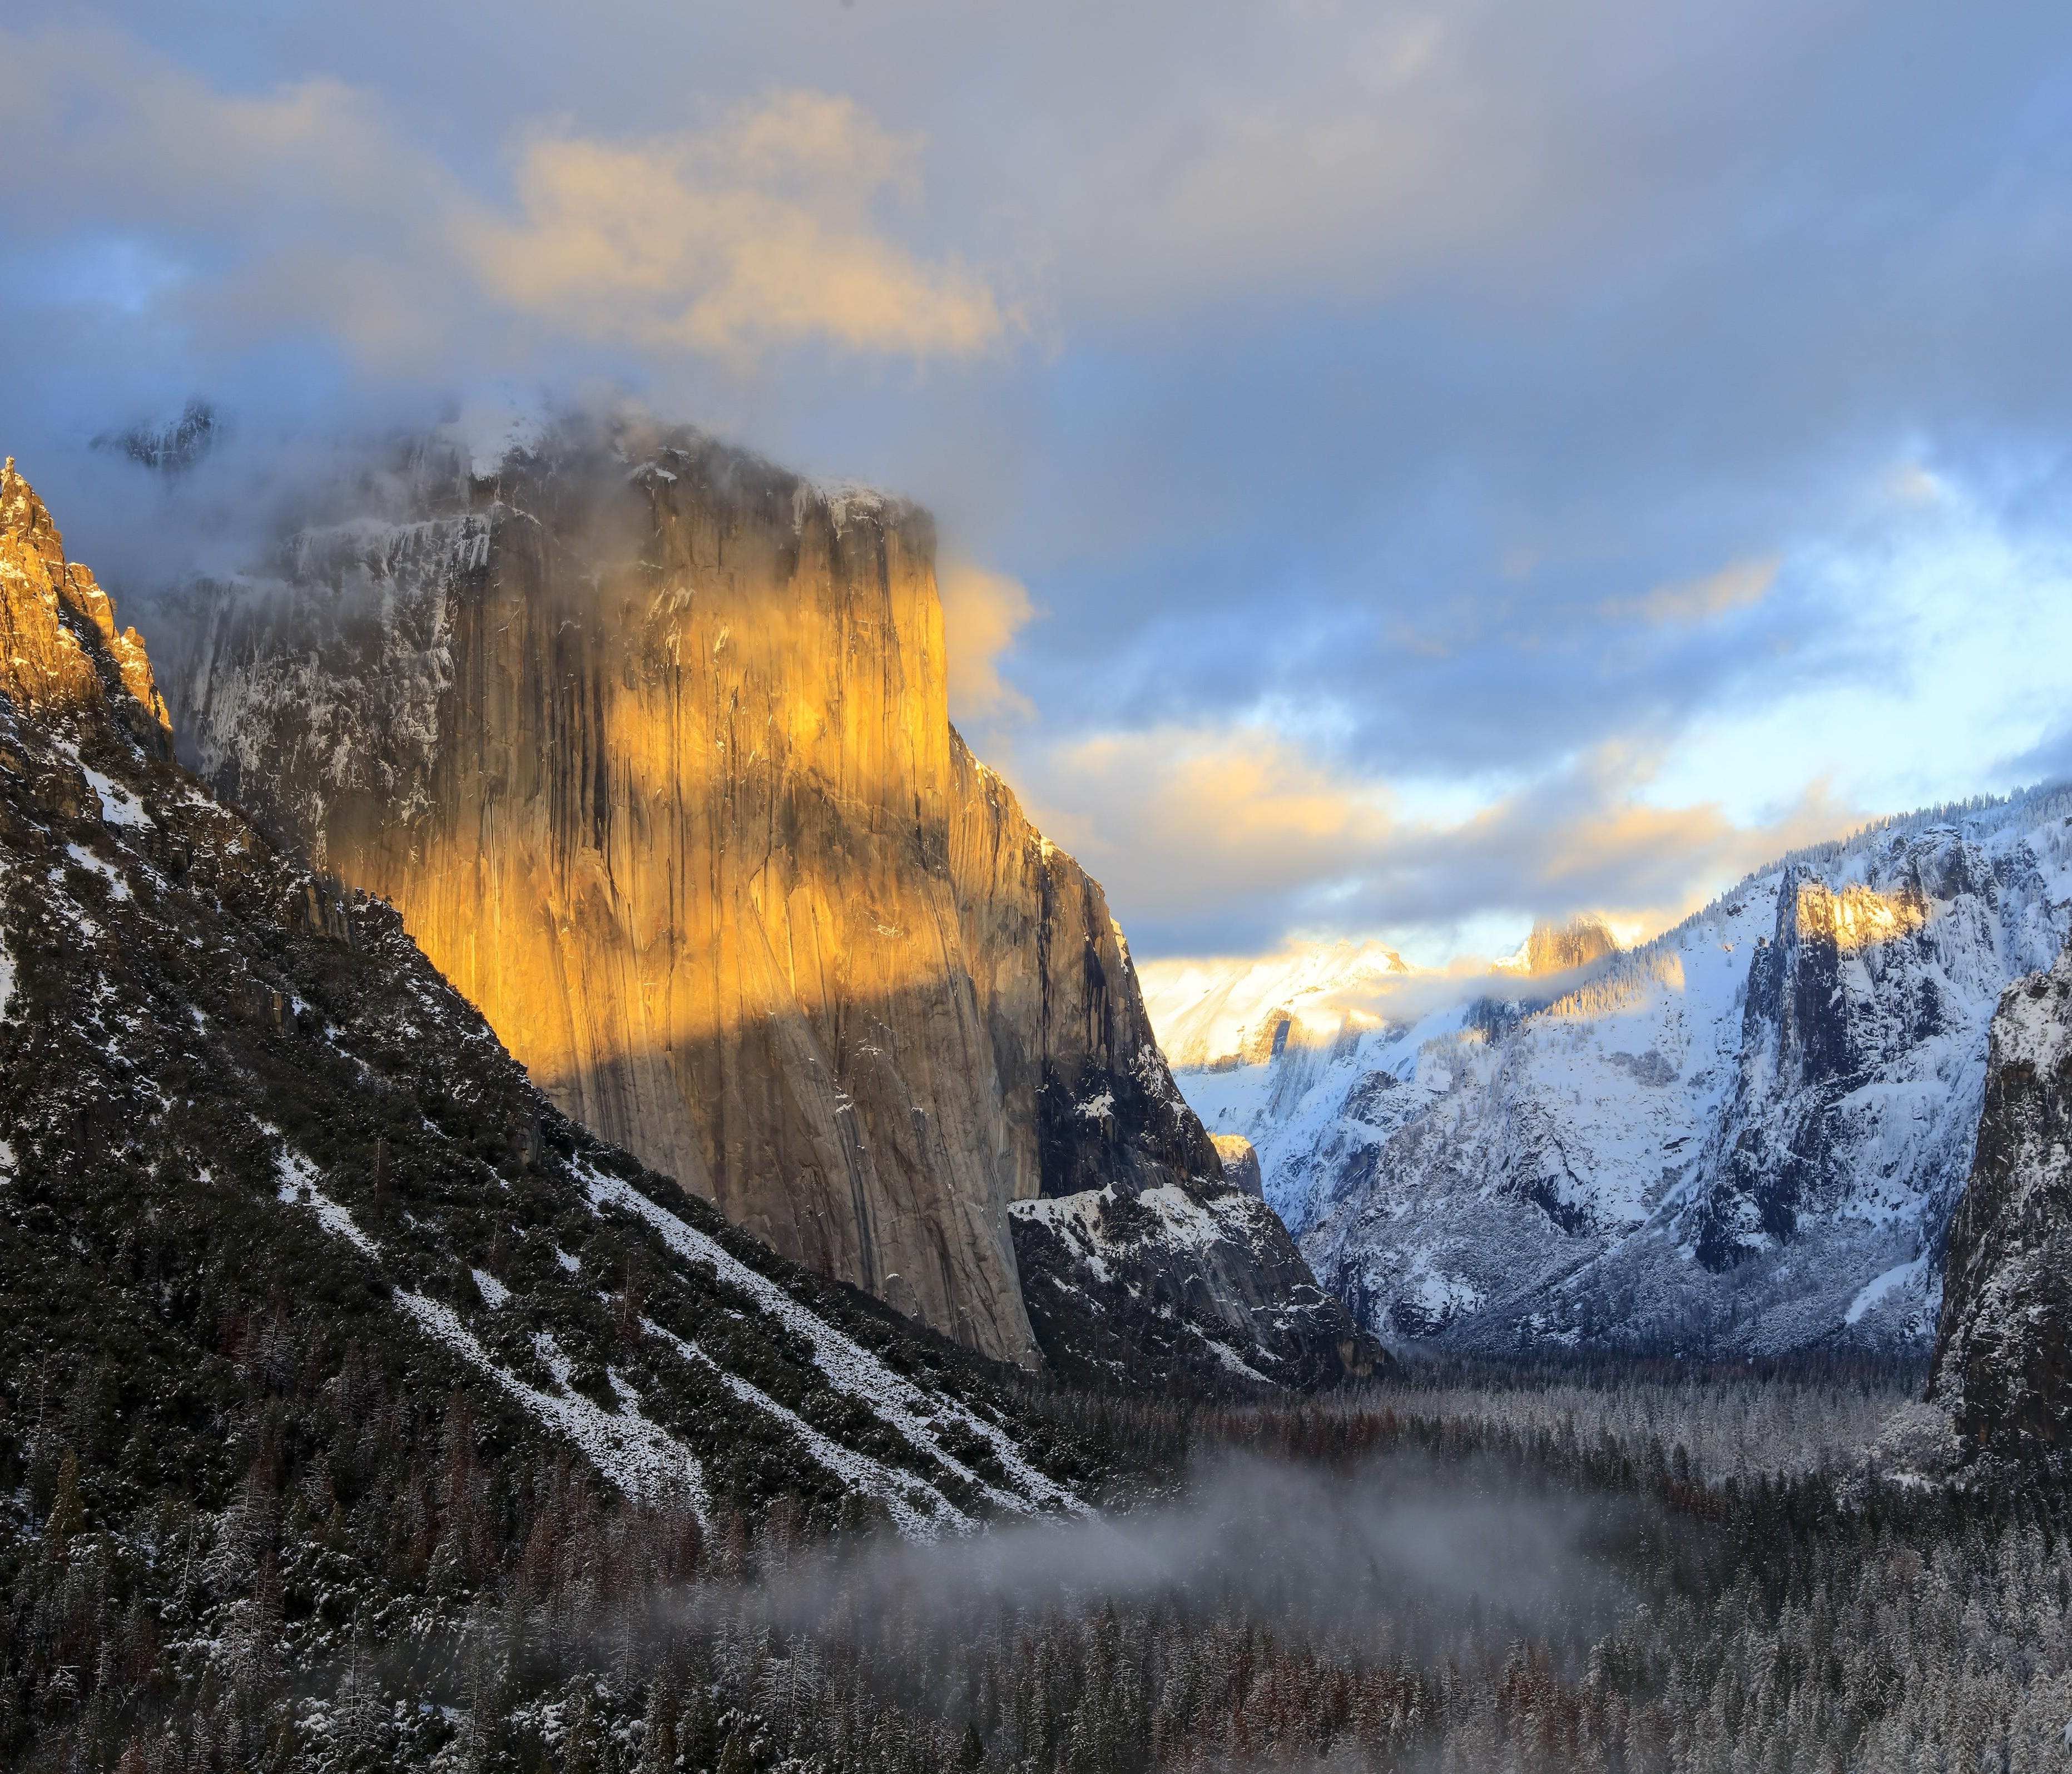 Sunset splashes the top of Yosemite's famous El Capitan with color on a January day. The 3,000-foot granite face is a favorite with rock climbers.